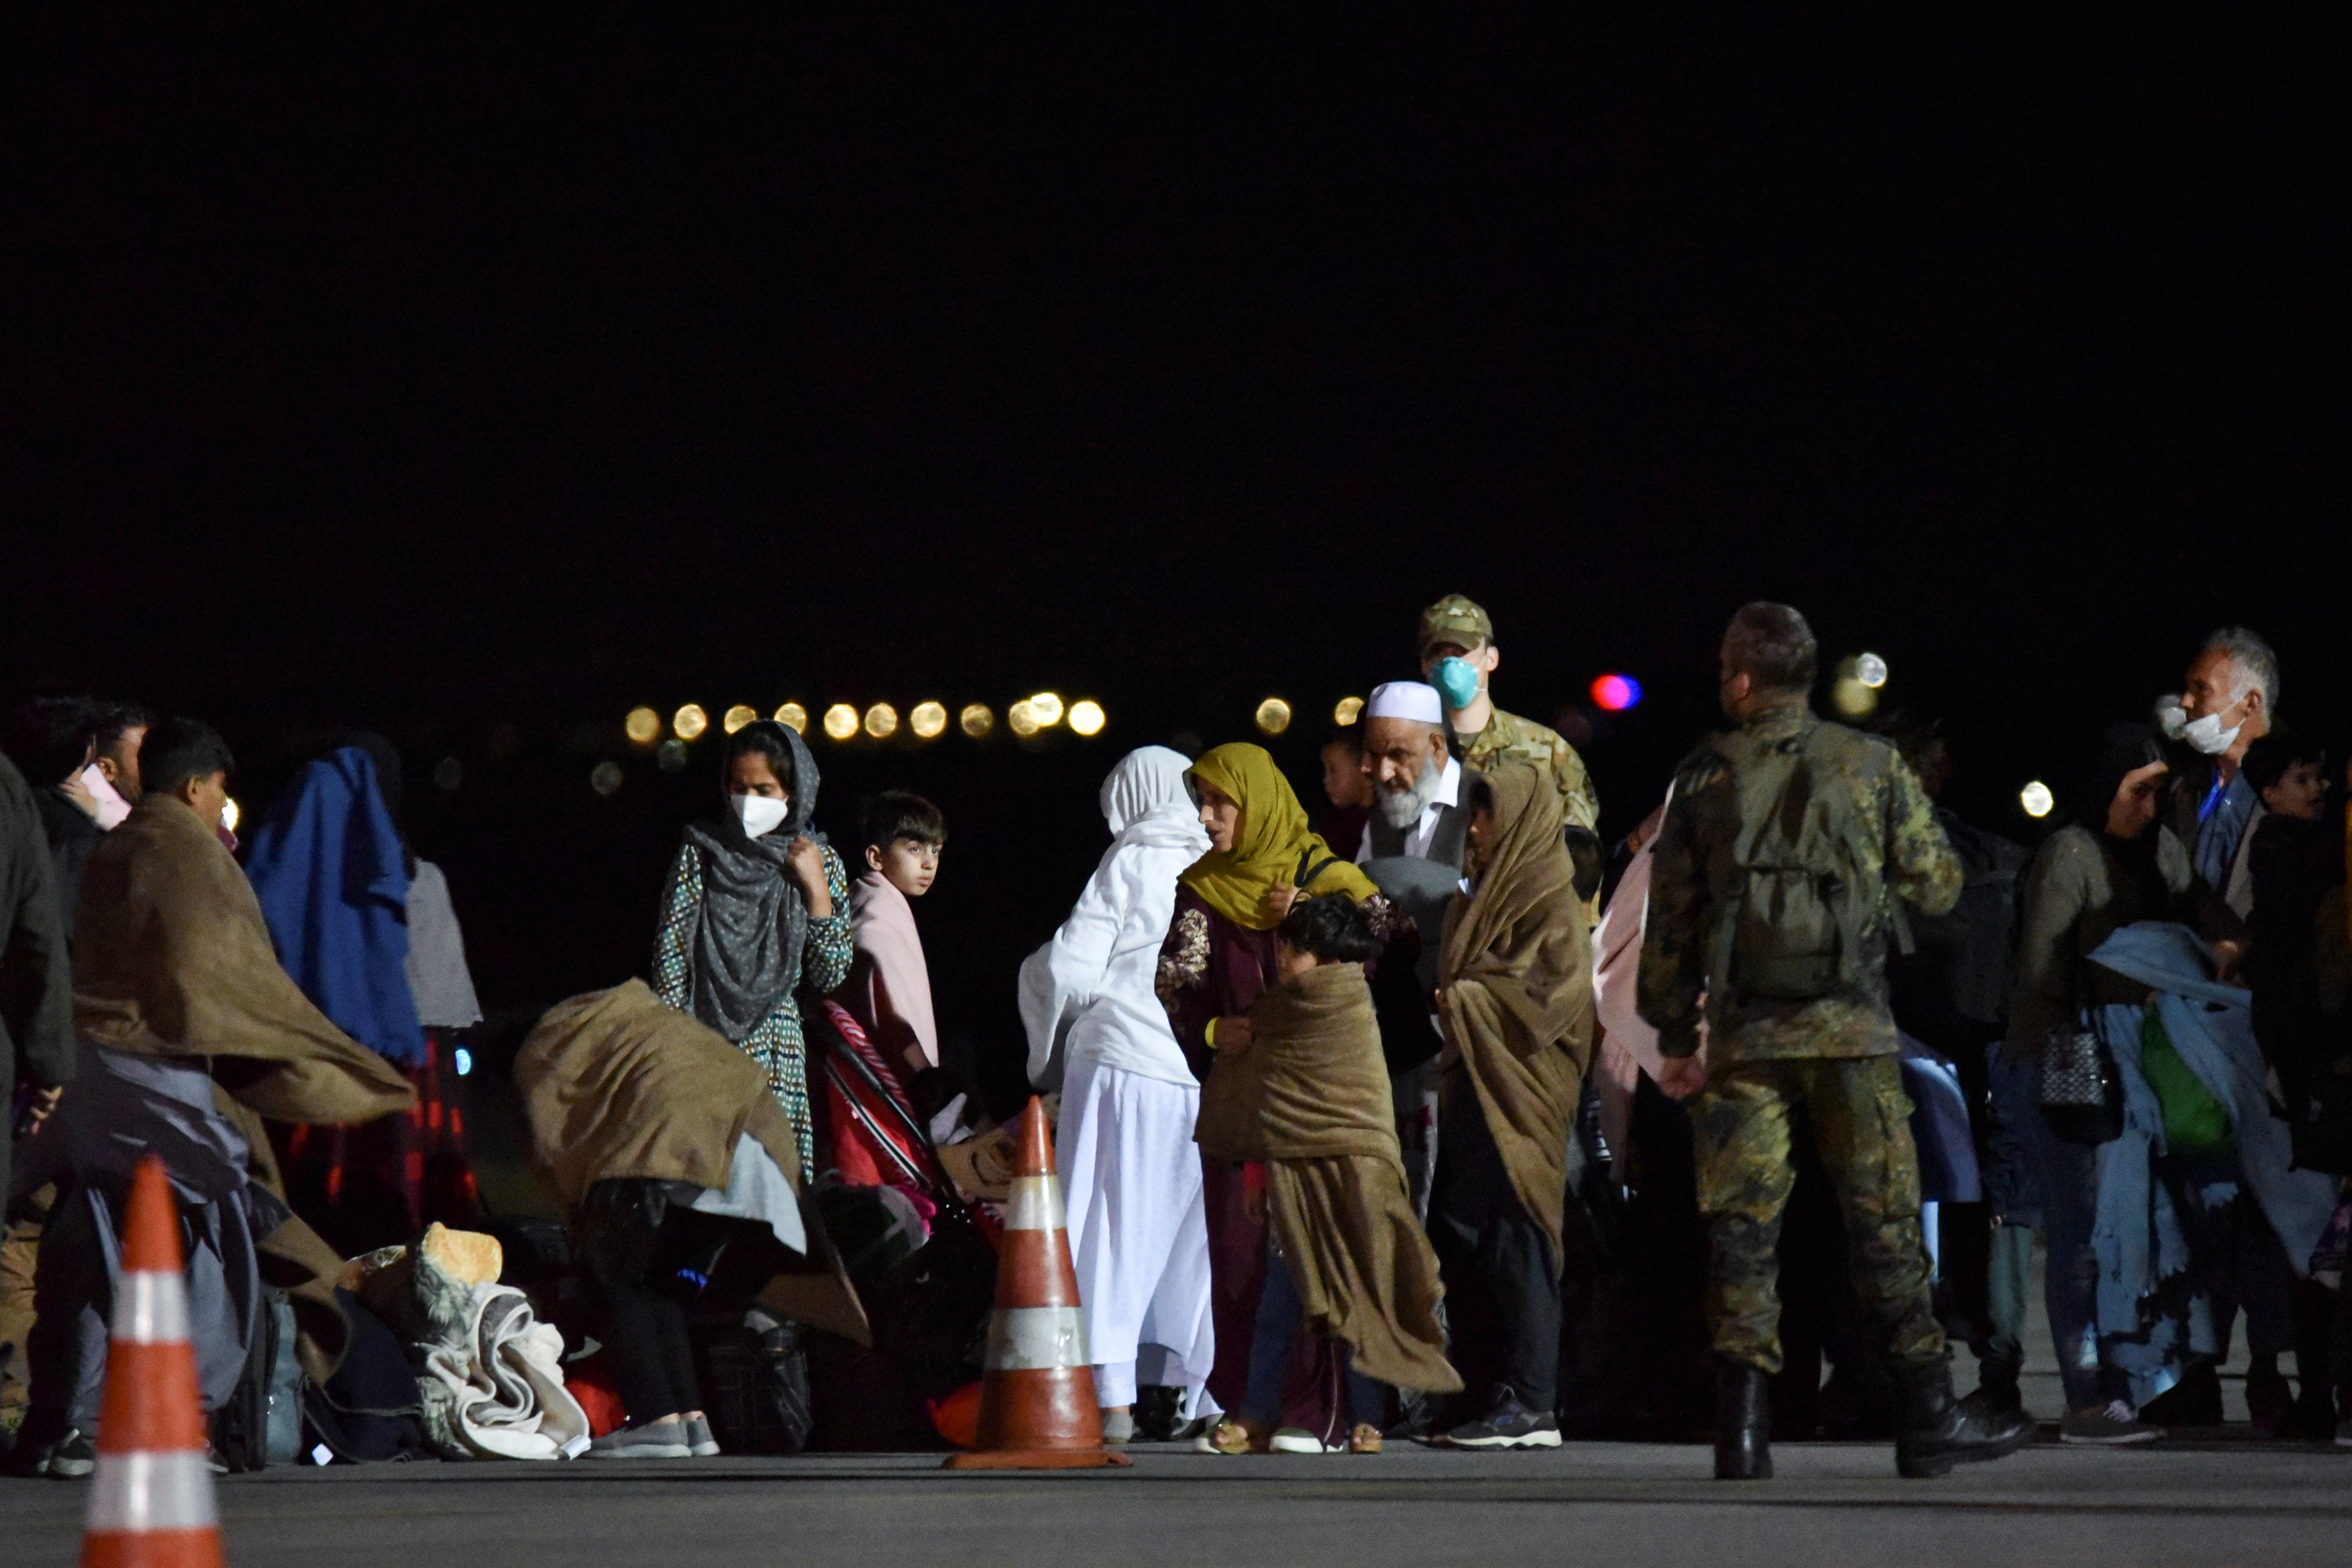 People who have been evacuated from Afghanistan arrive at Pristina International Airport in Pristina, Kosovo August 29, 2021, after Taliban insurgents entered Afghanistan's capital Kabul. REUTERS/Laura Hasani